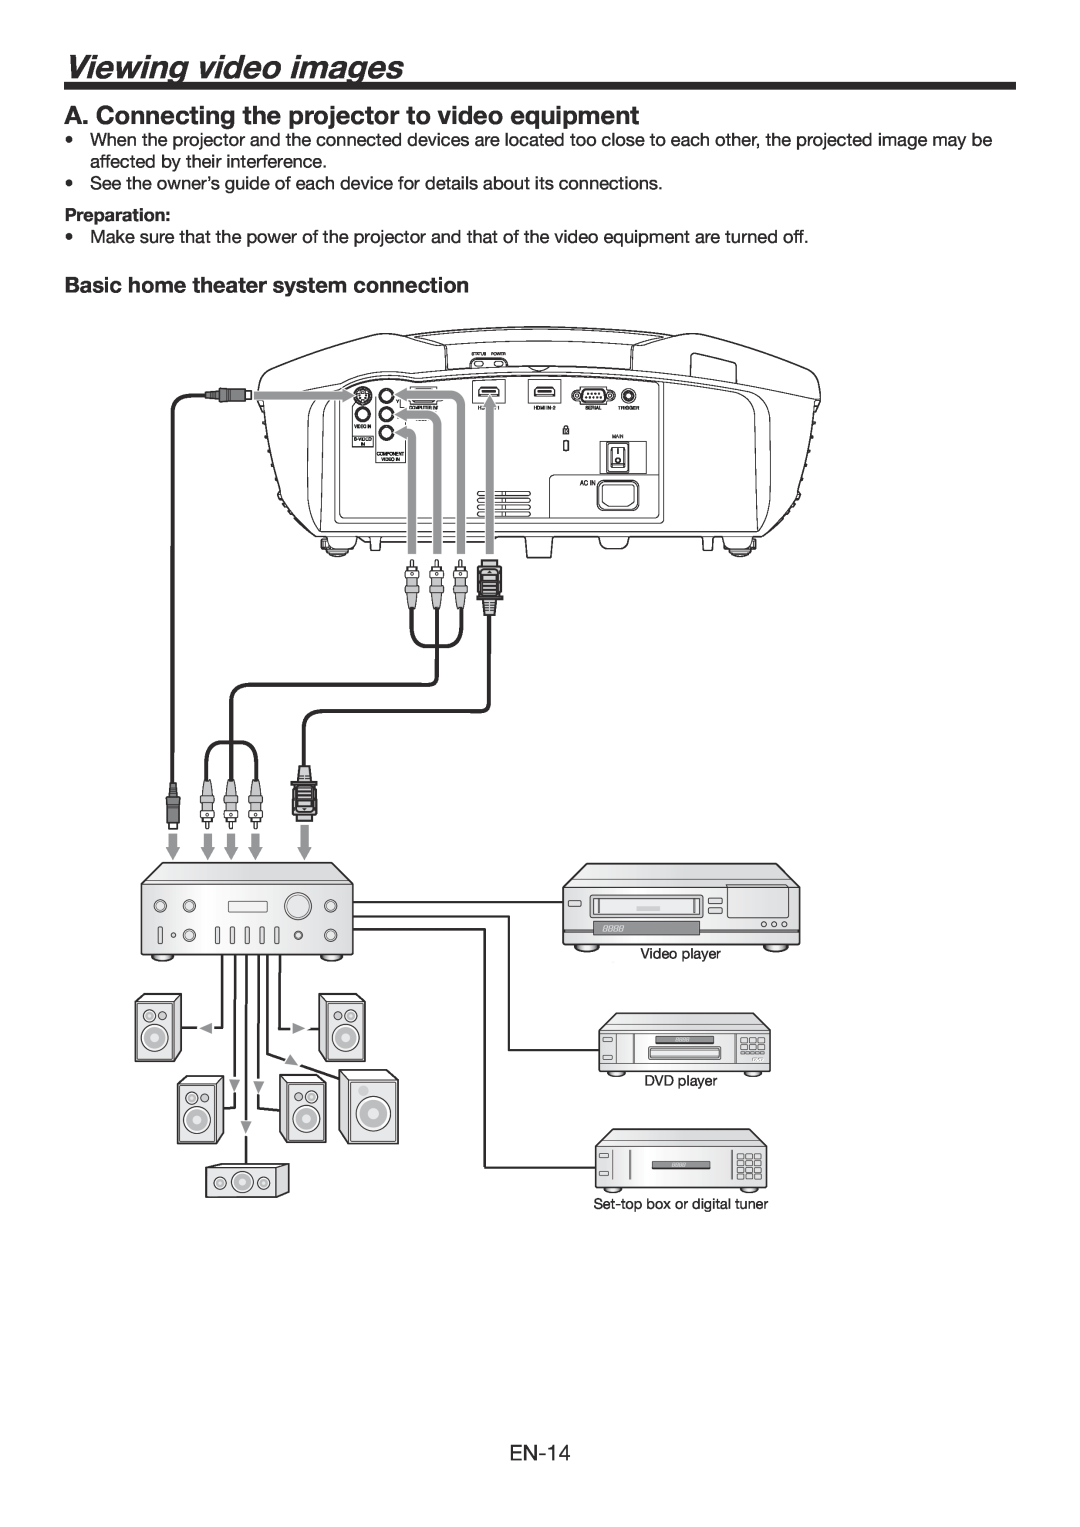 Mitsubishi Electronics HC6800 user manual Viewing video images, A. Connecting the projector to video equipment, Preparation 